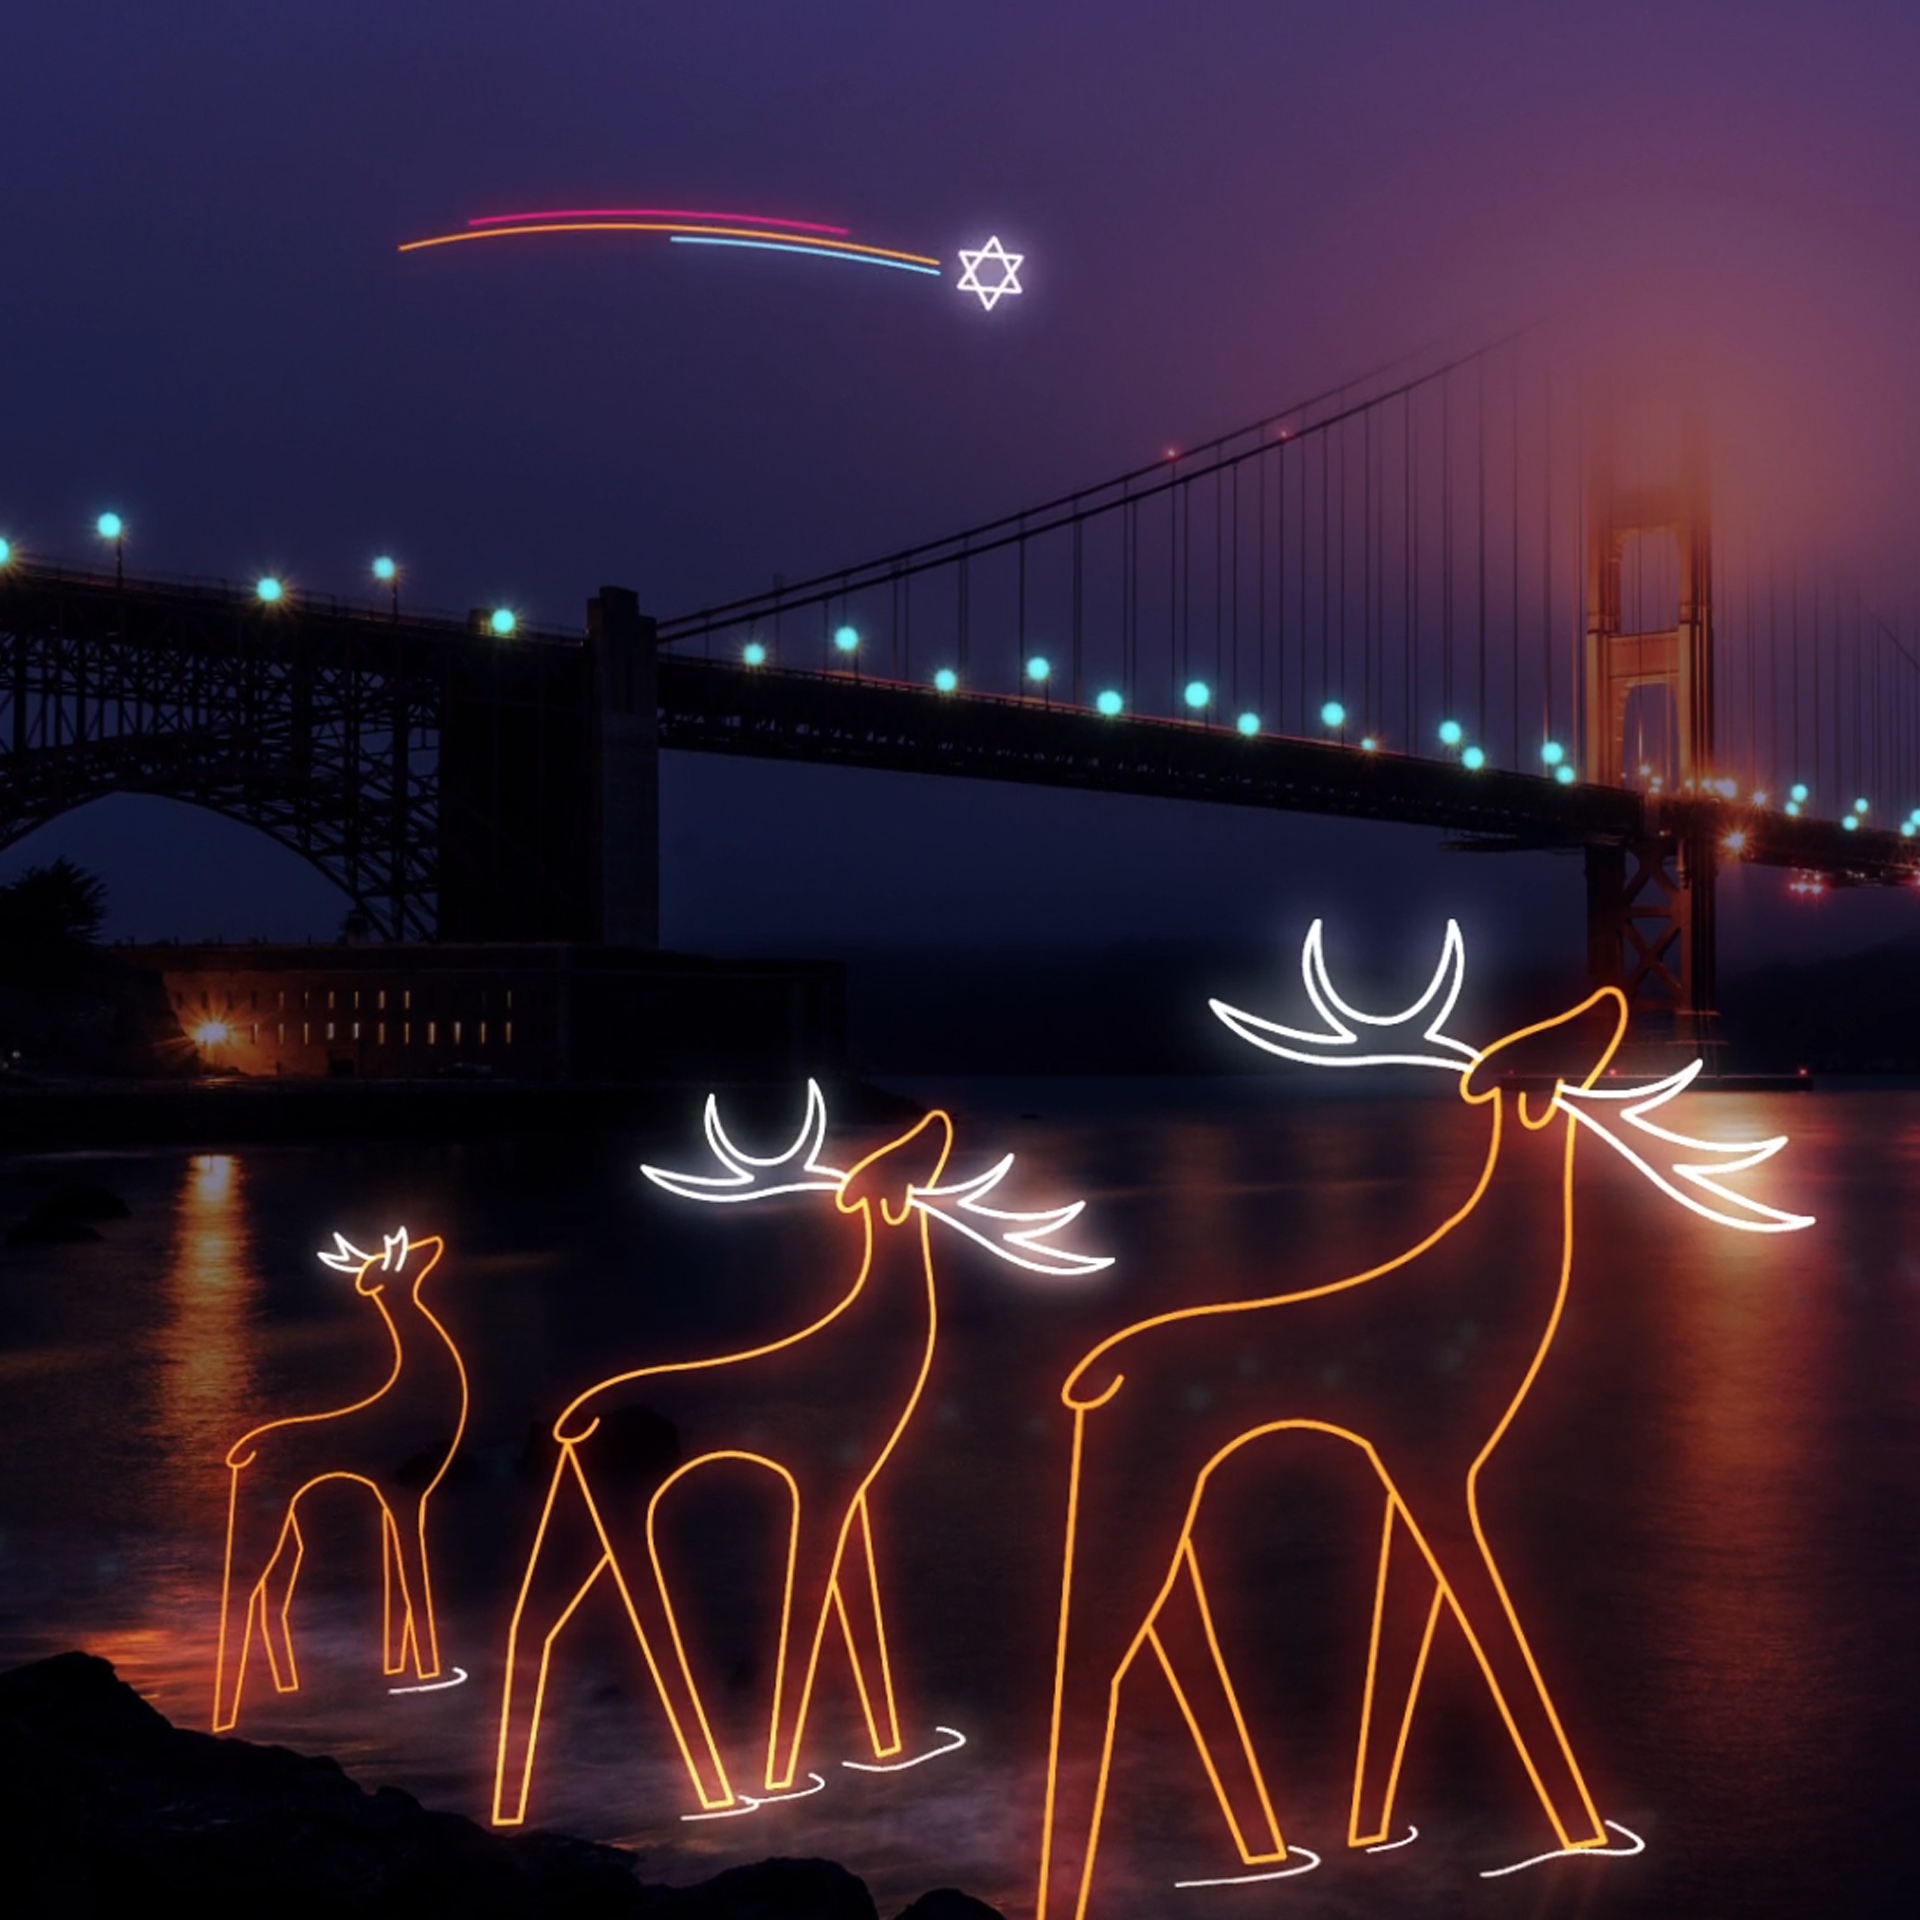 Illustration of neon reindeers on the Thames